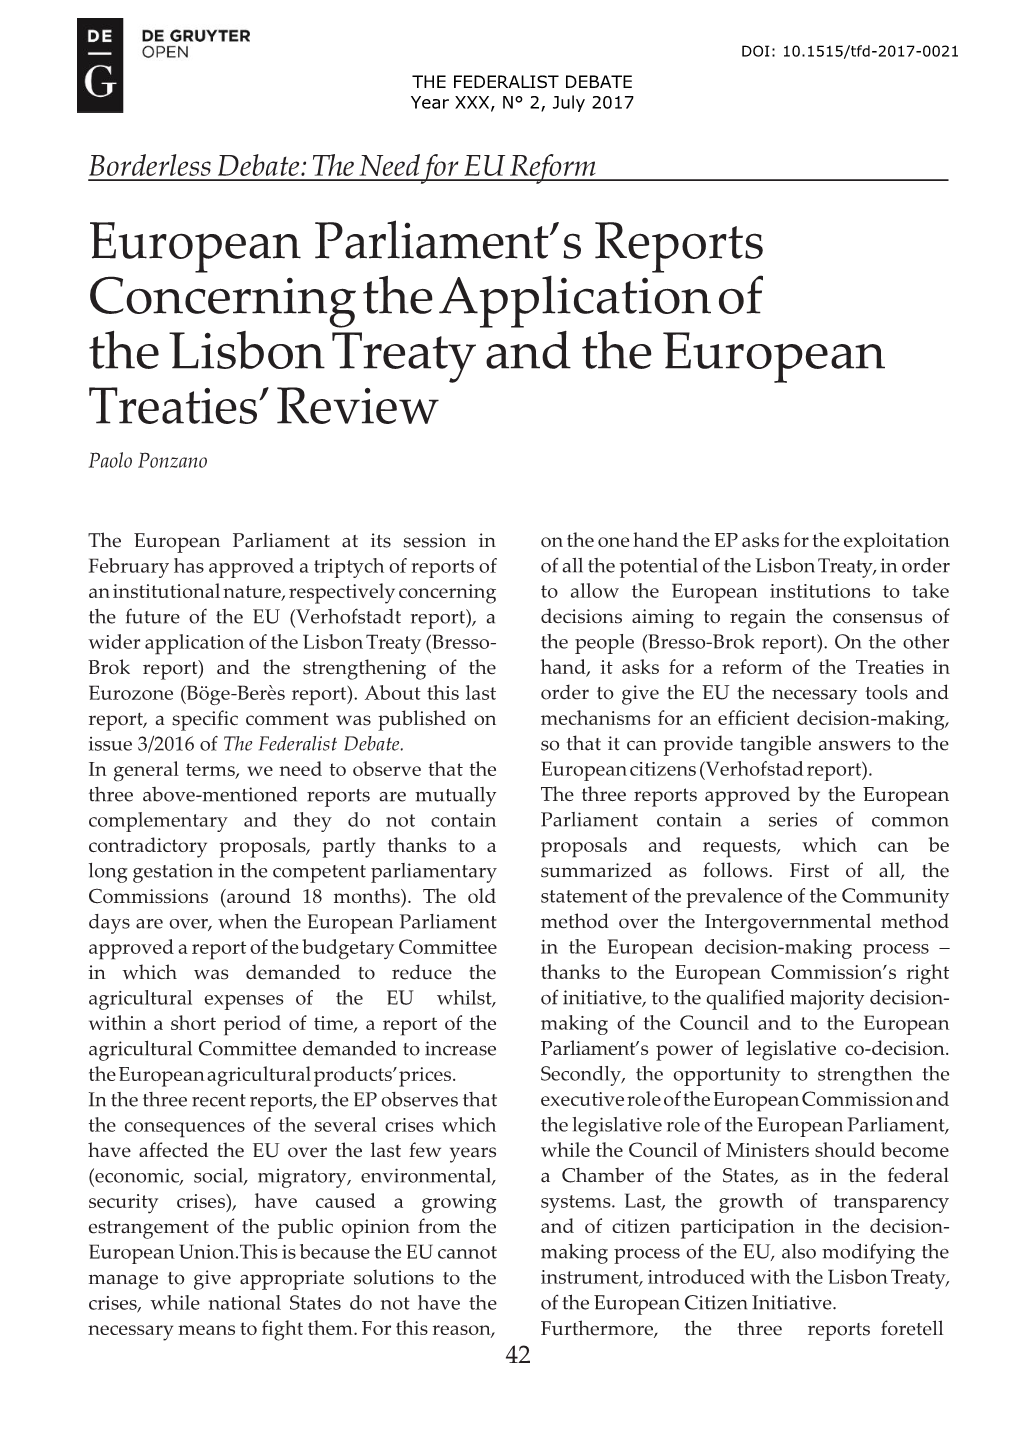 European Parliament's Reports Concerning the Application of the Lisbon Treaty and the European Treaties' Review